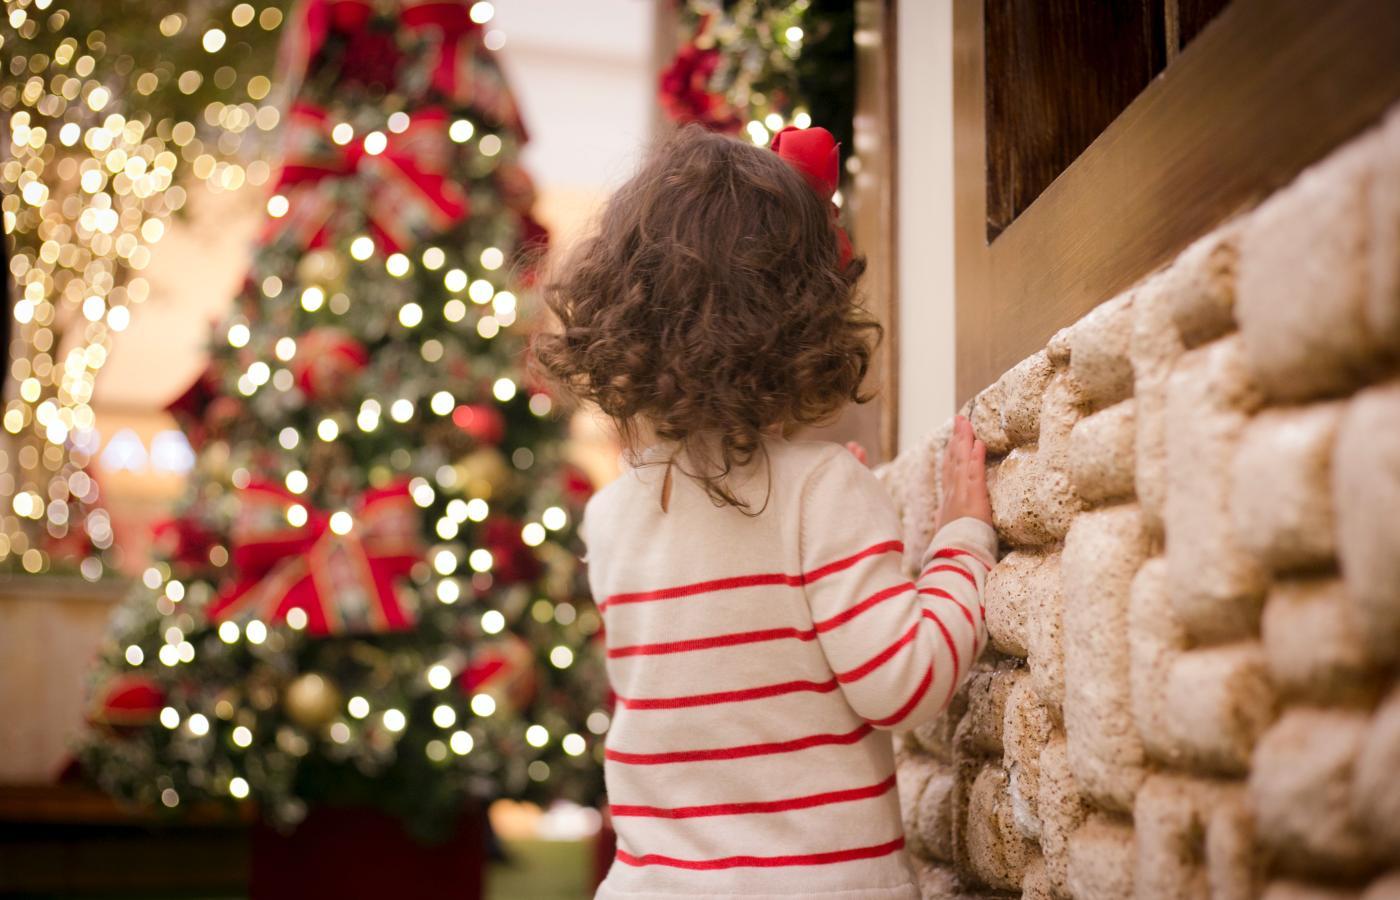 Child in striped sweater looking at Christmas tree